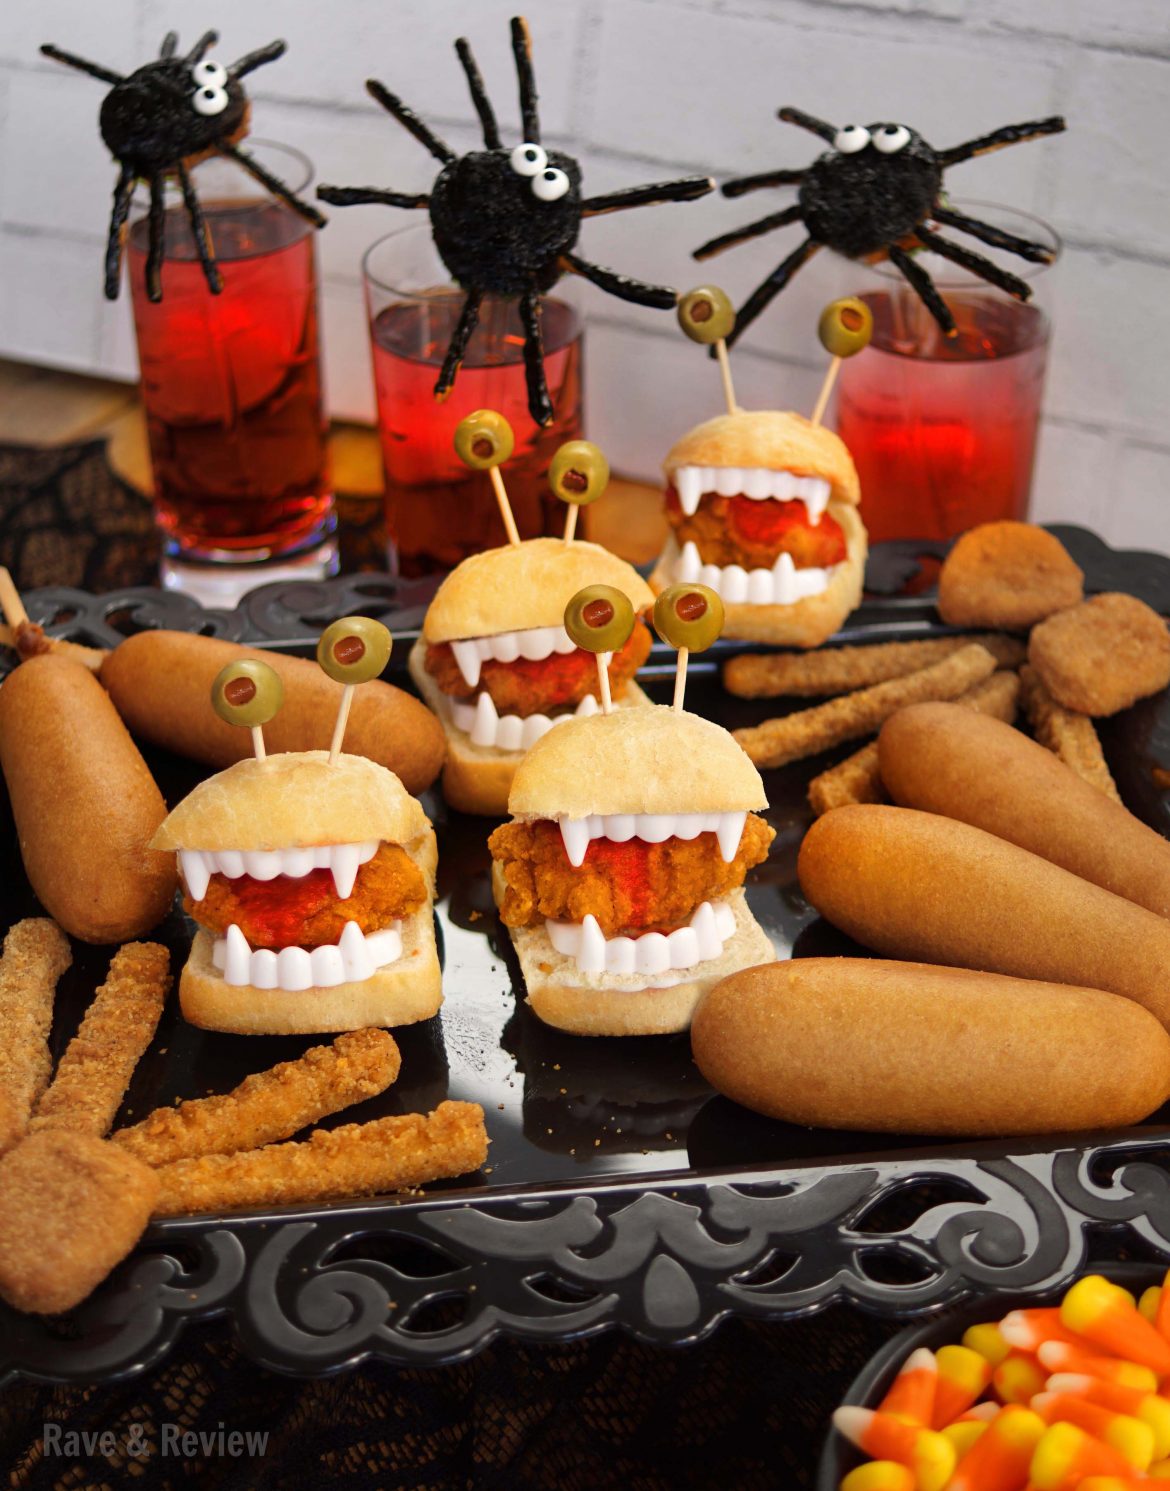 Spooky swizzle sticks and chicken sliders for Halloween - Rave & Review